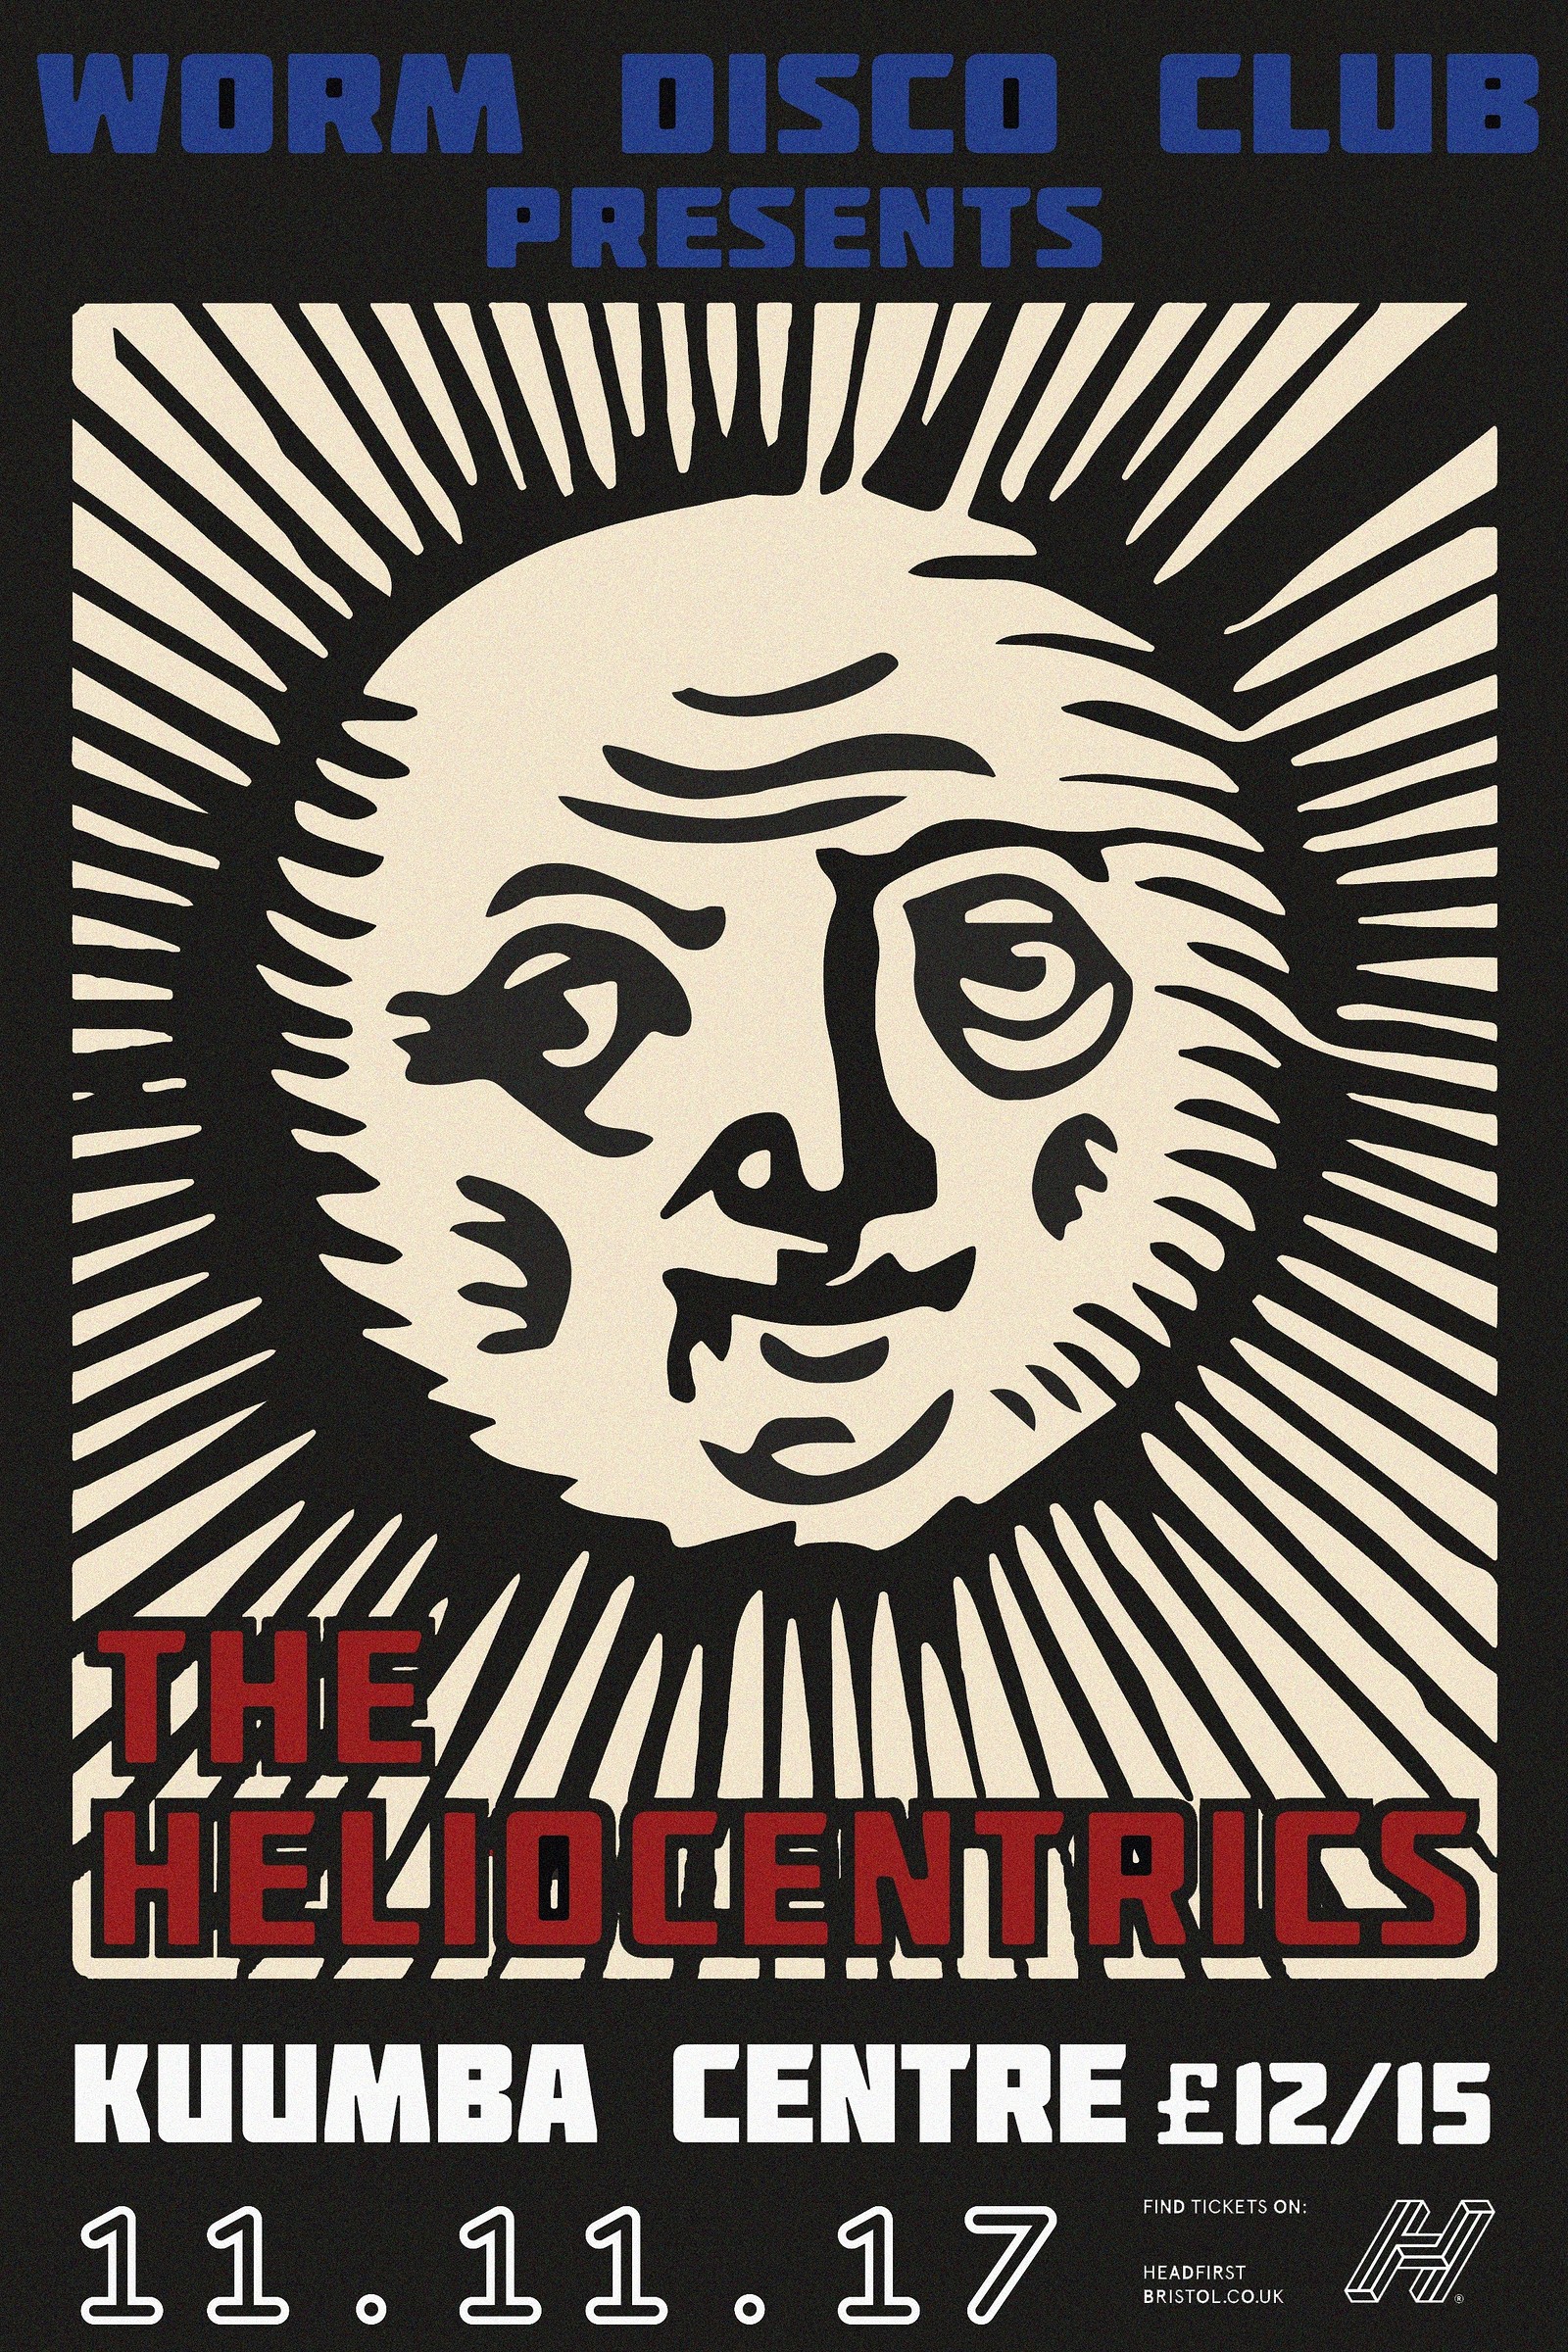 WDC Presents; The Heliocentrics at The Kuumba Centre